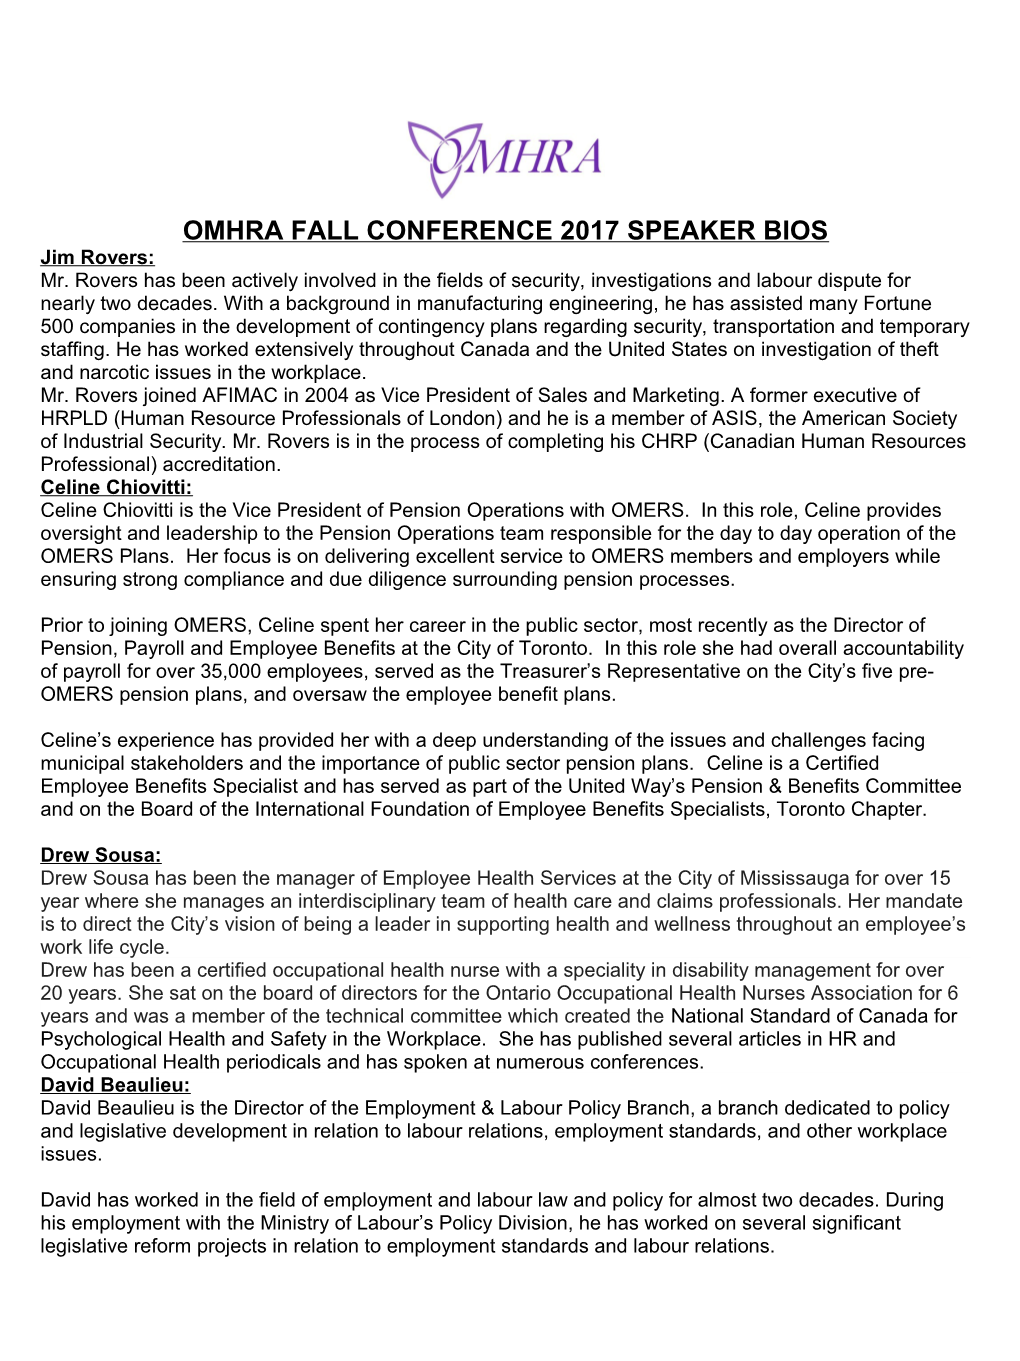 Omhra Fall Conference 2017 Speaker Bios